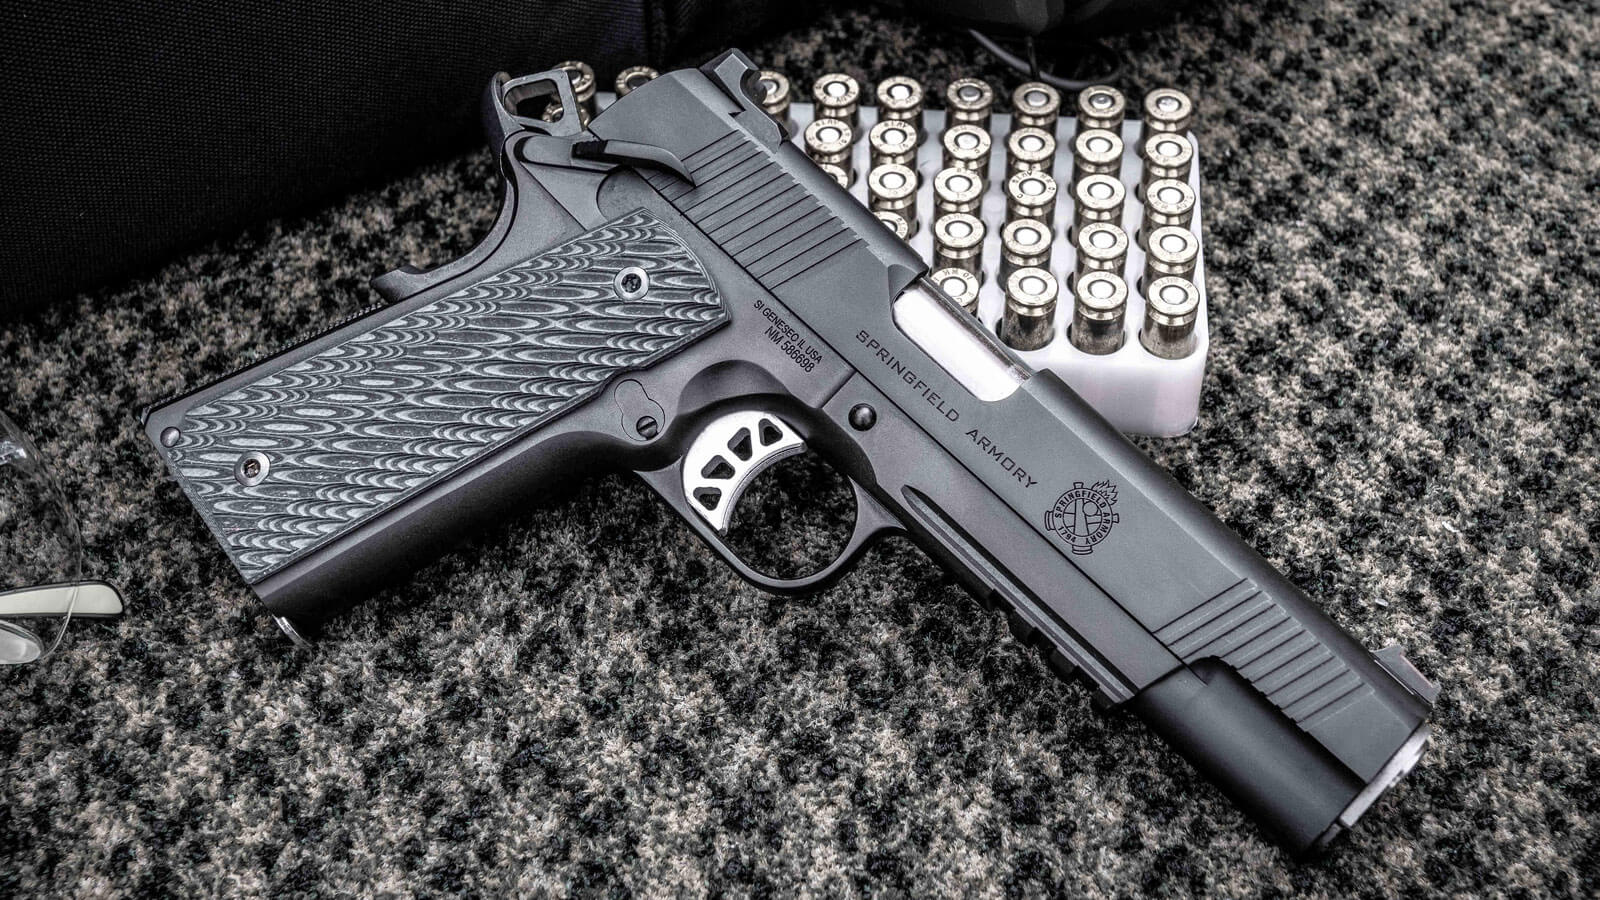 Your Next 10mm? Range Officer 1911 - The Armory Life